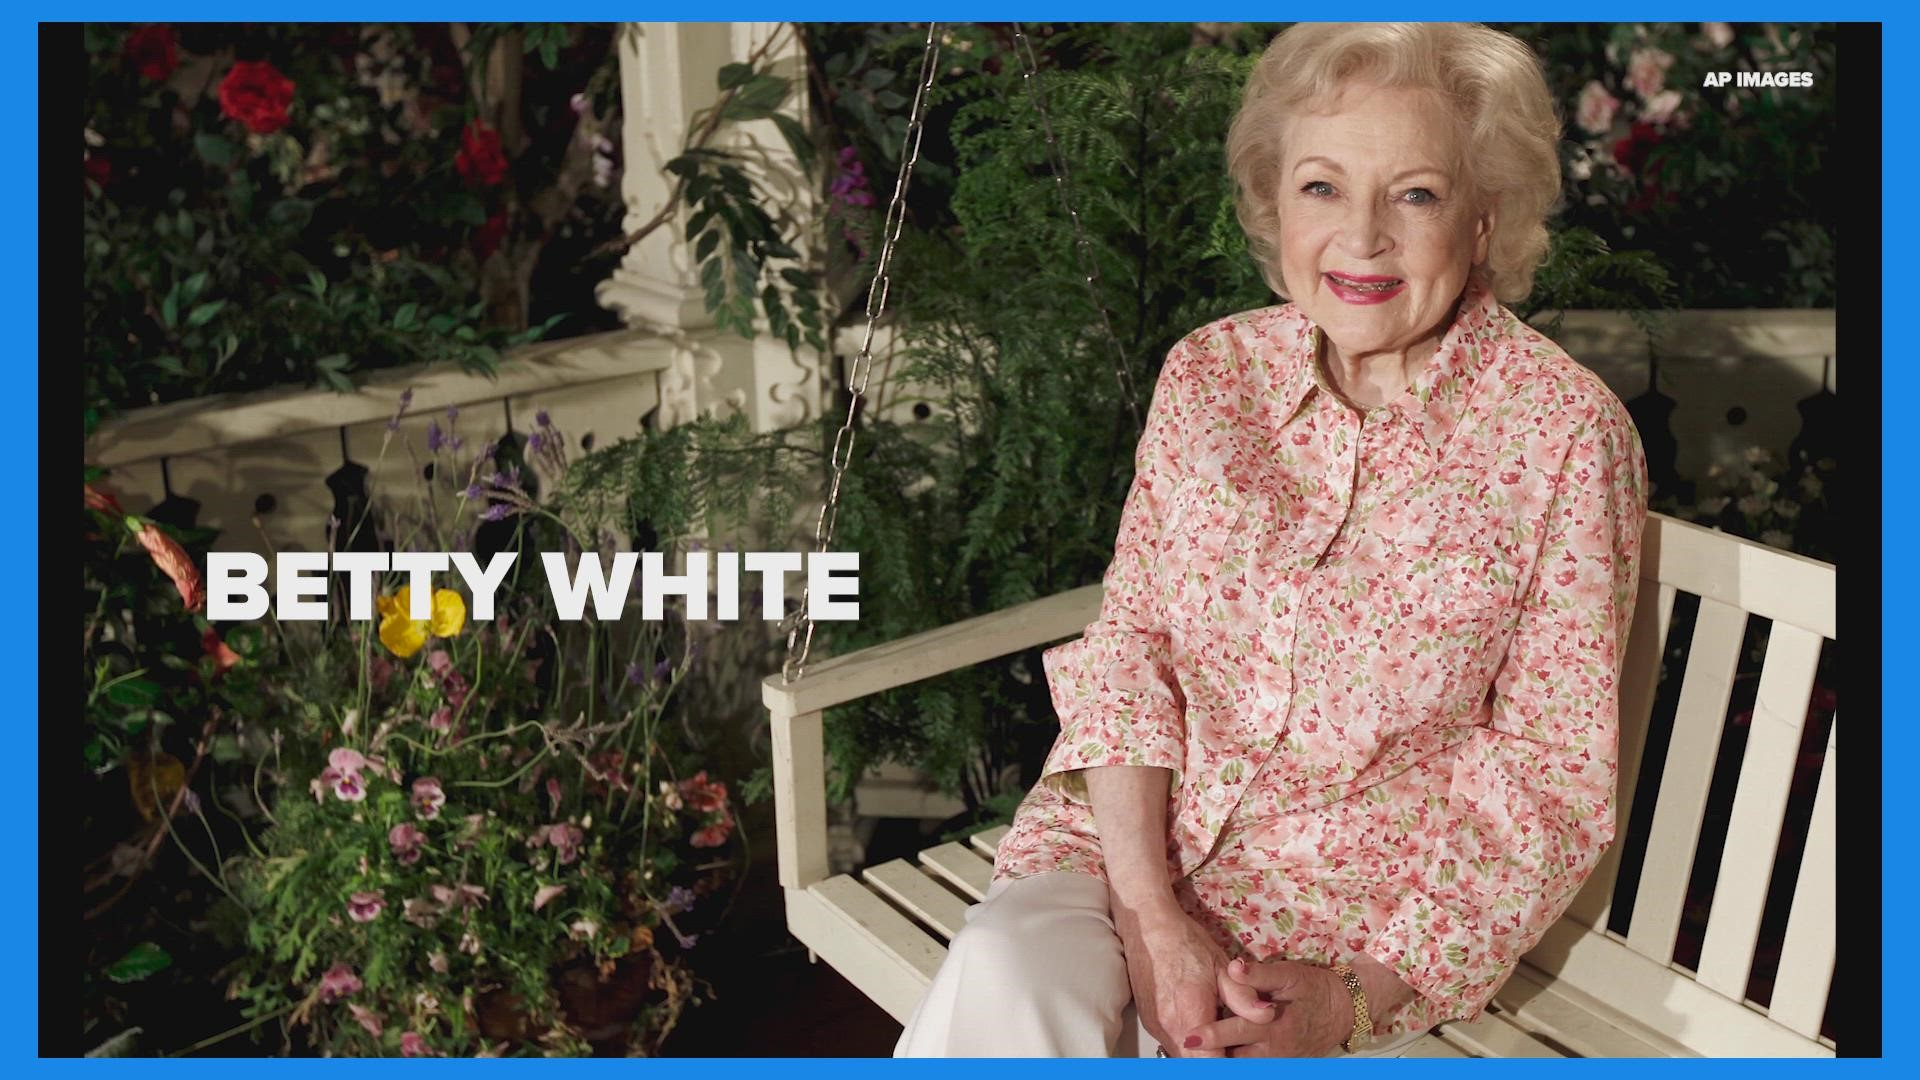 Betty White, beloved cultural icon and 'Golden Girl,' dies at 99